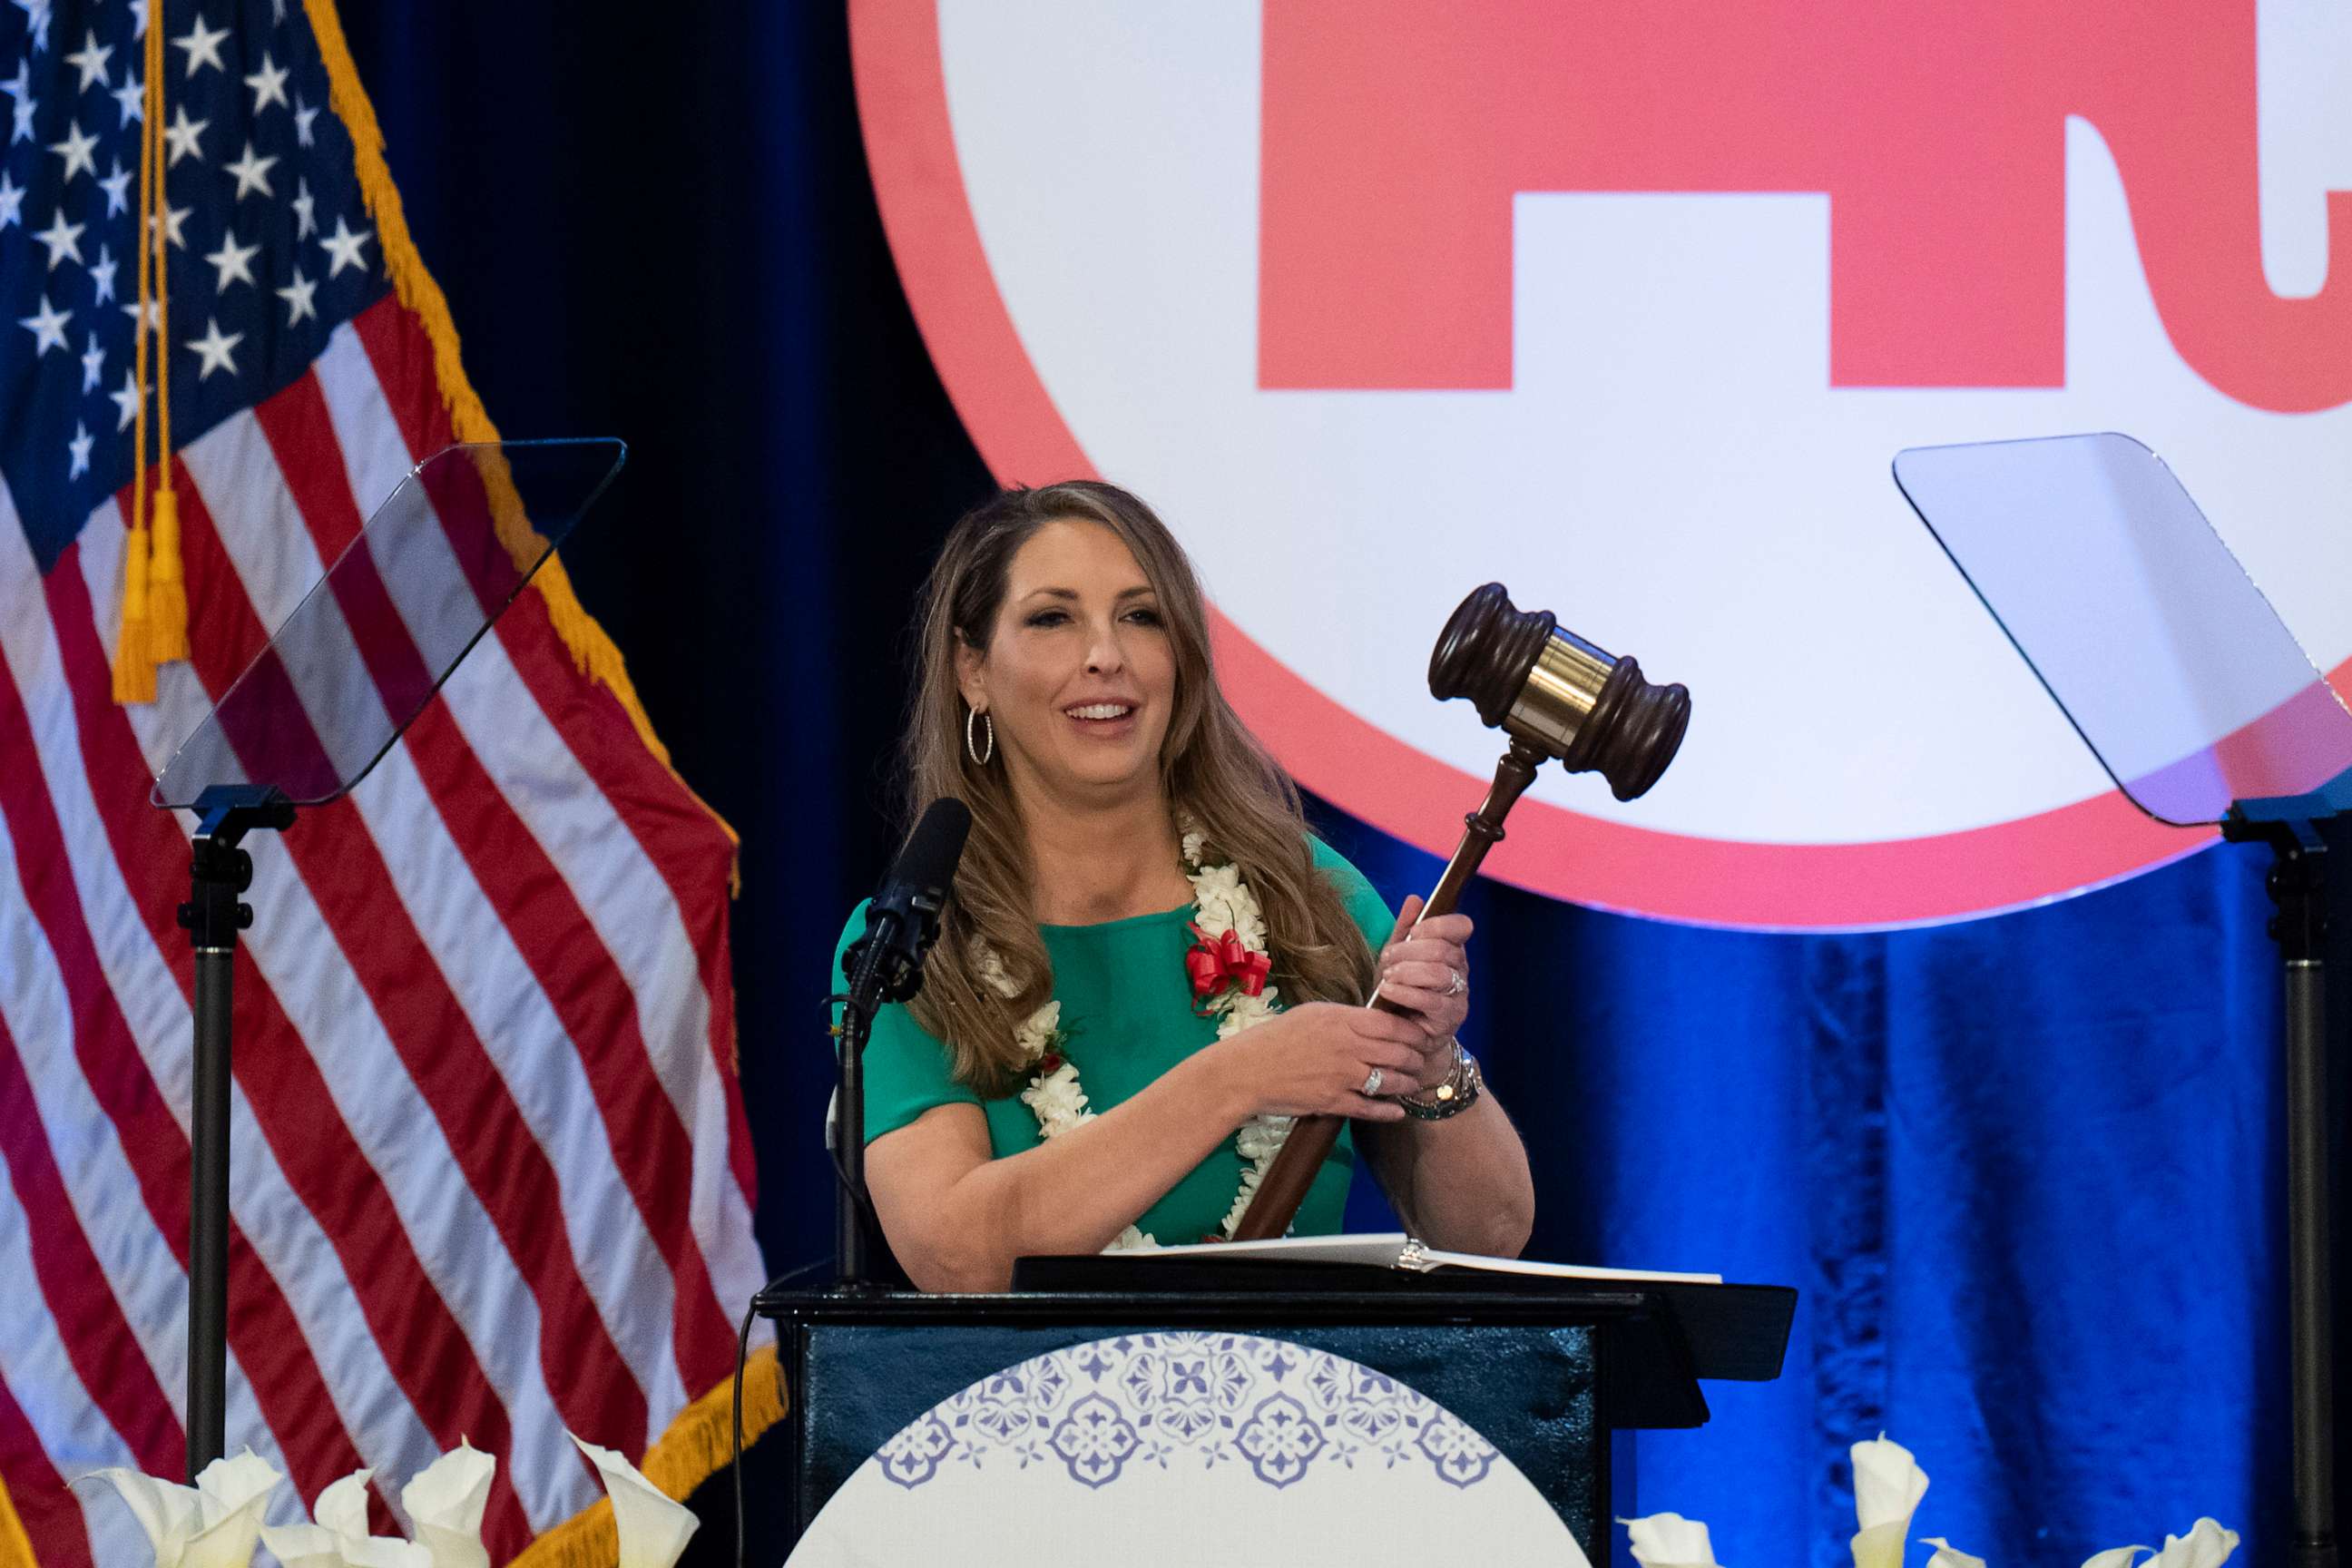 PHOTO: Re-elected Republican National Committee Chair Ronna McDaniel holds a gavel while speaking at the committee's winter meeting in Dana Point, Calif., on Jan. 27, 2023.